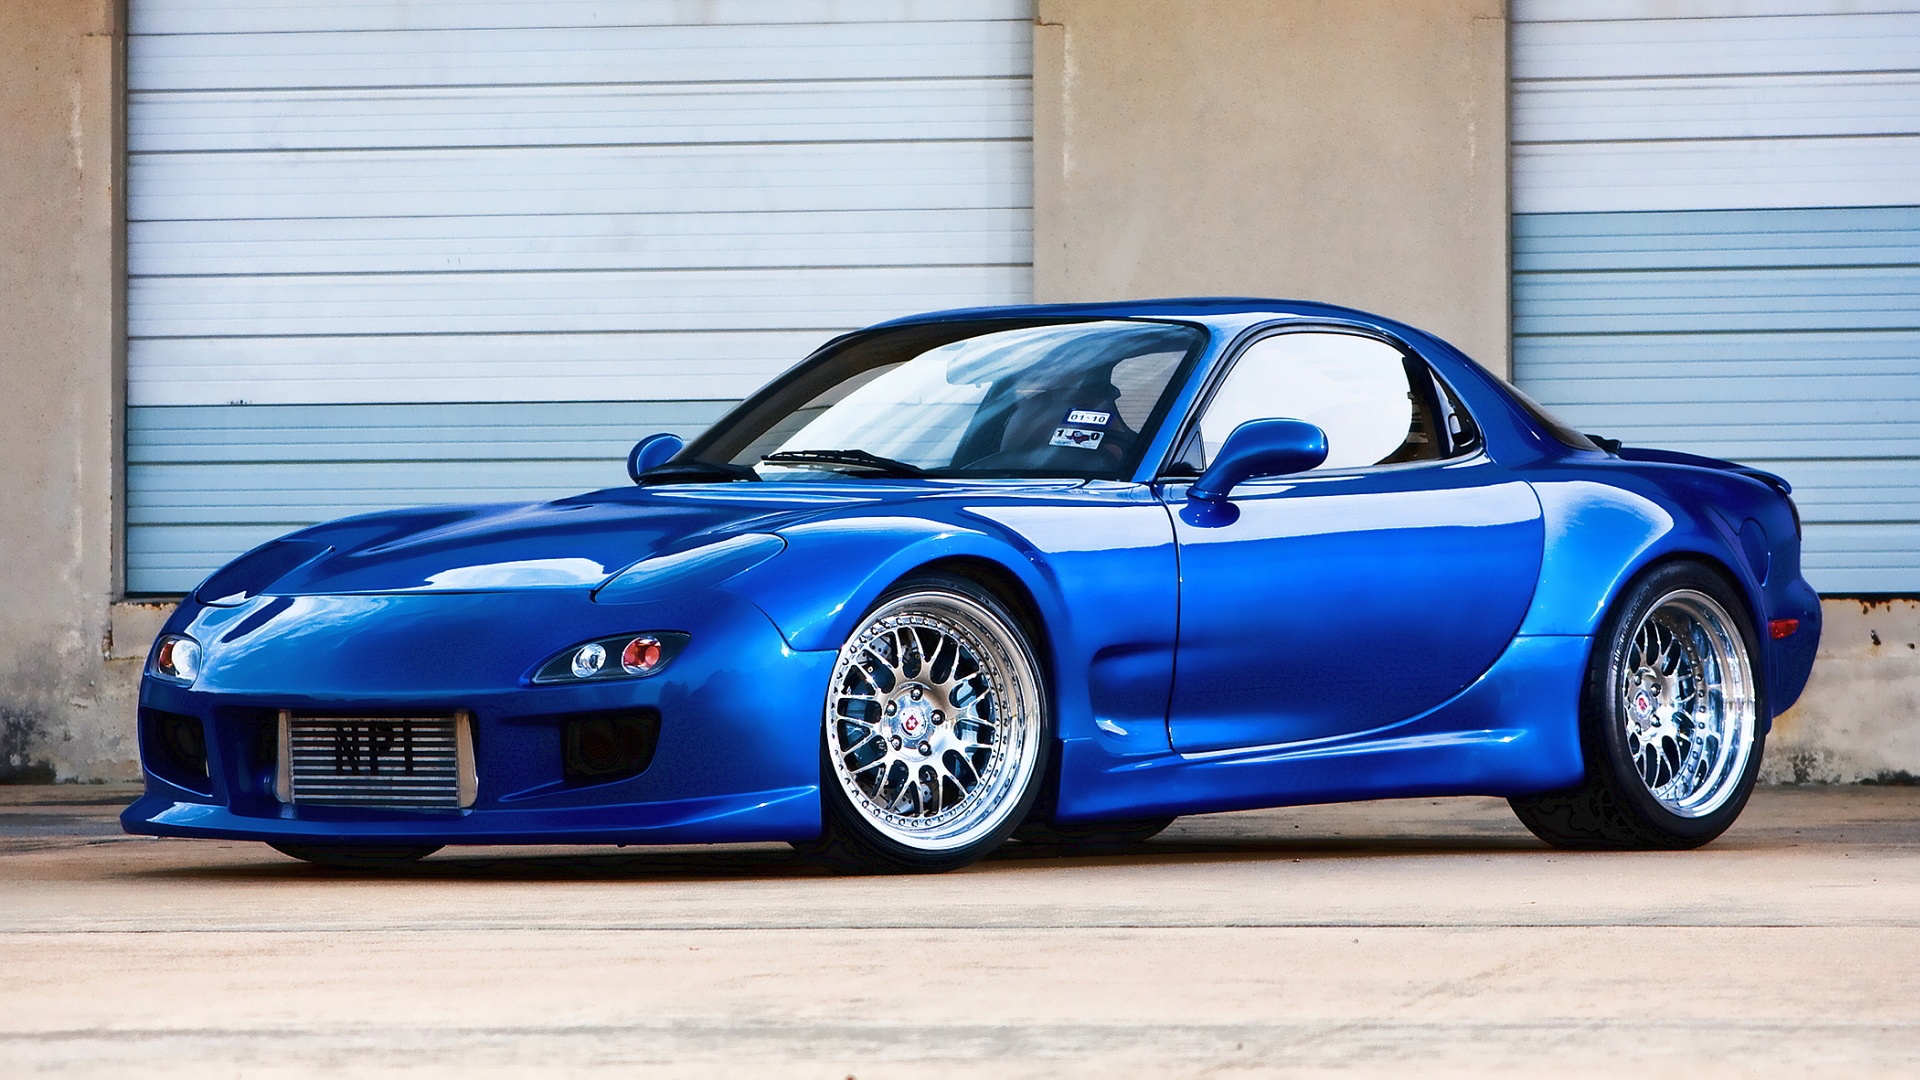 HD Mazda Rx7 Wallpaper Full Pictures